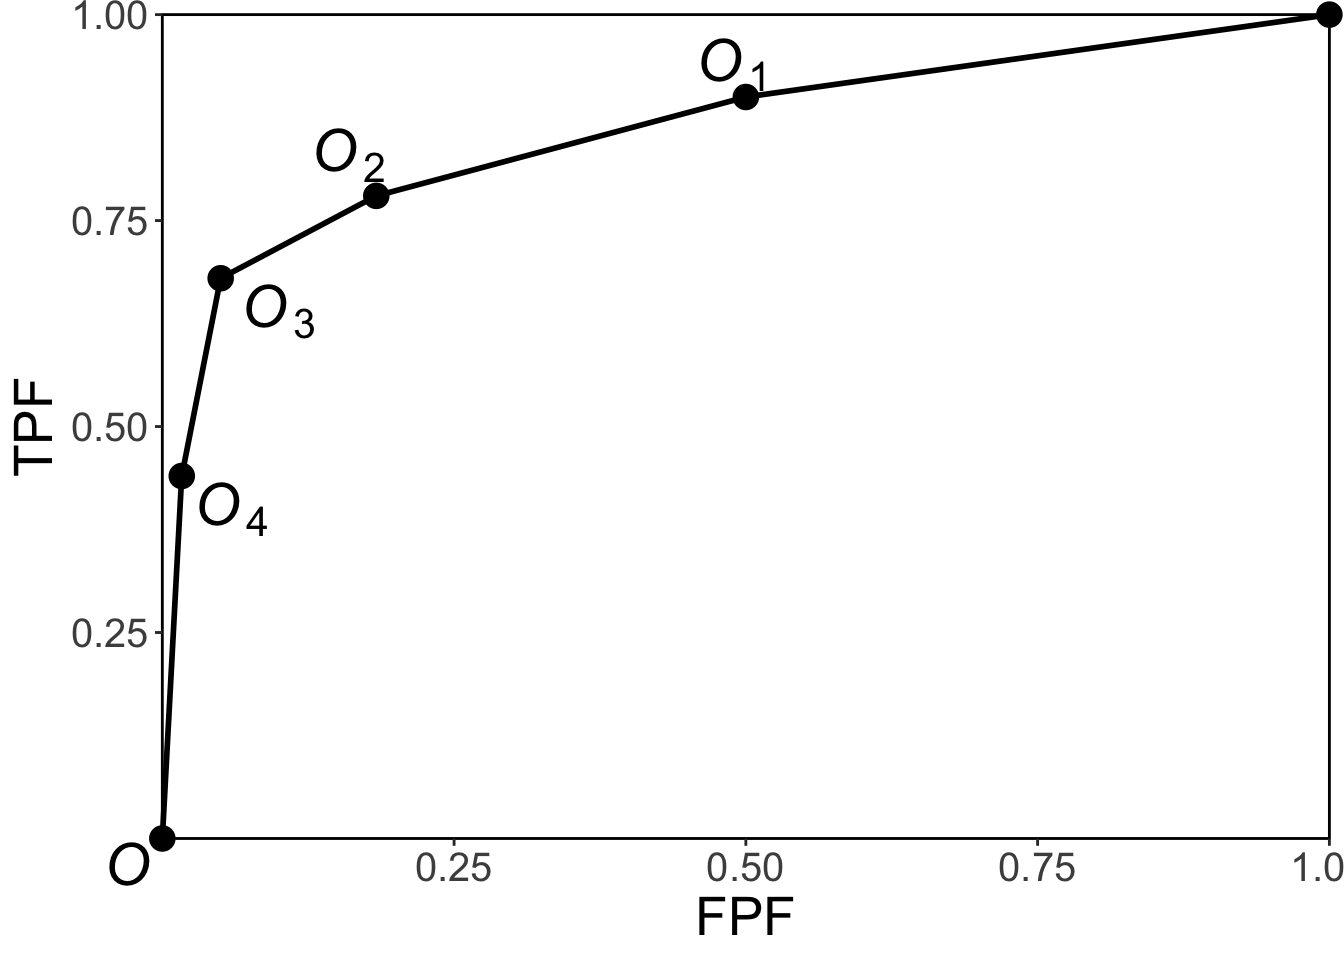 Empirical ROC plot for the data in Table 4.1. By convention the operating points are numbered starting with the uppermost non-trivial one and working down the plot and the trivial operating points (0,0) and (1,1) are not shown.